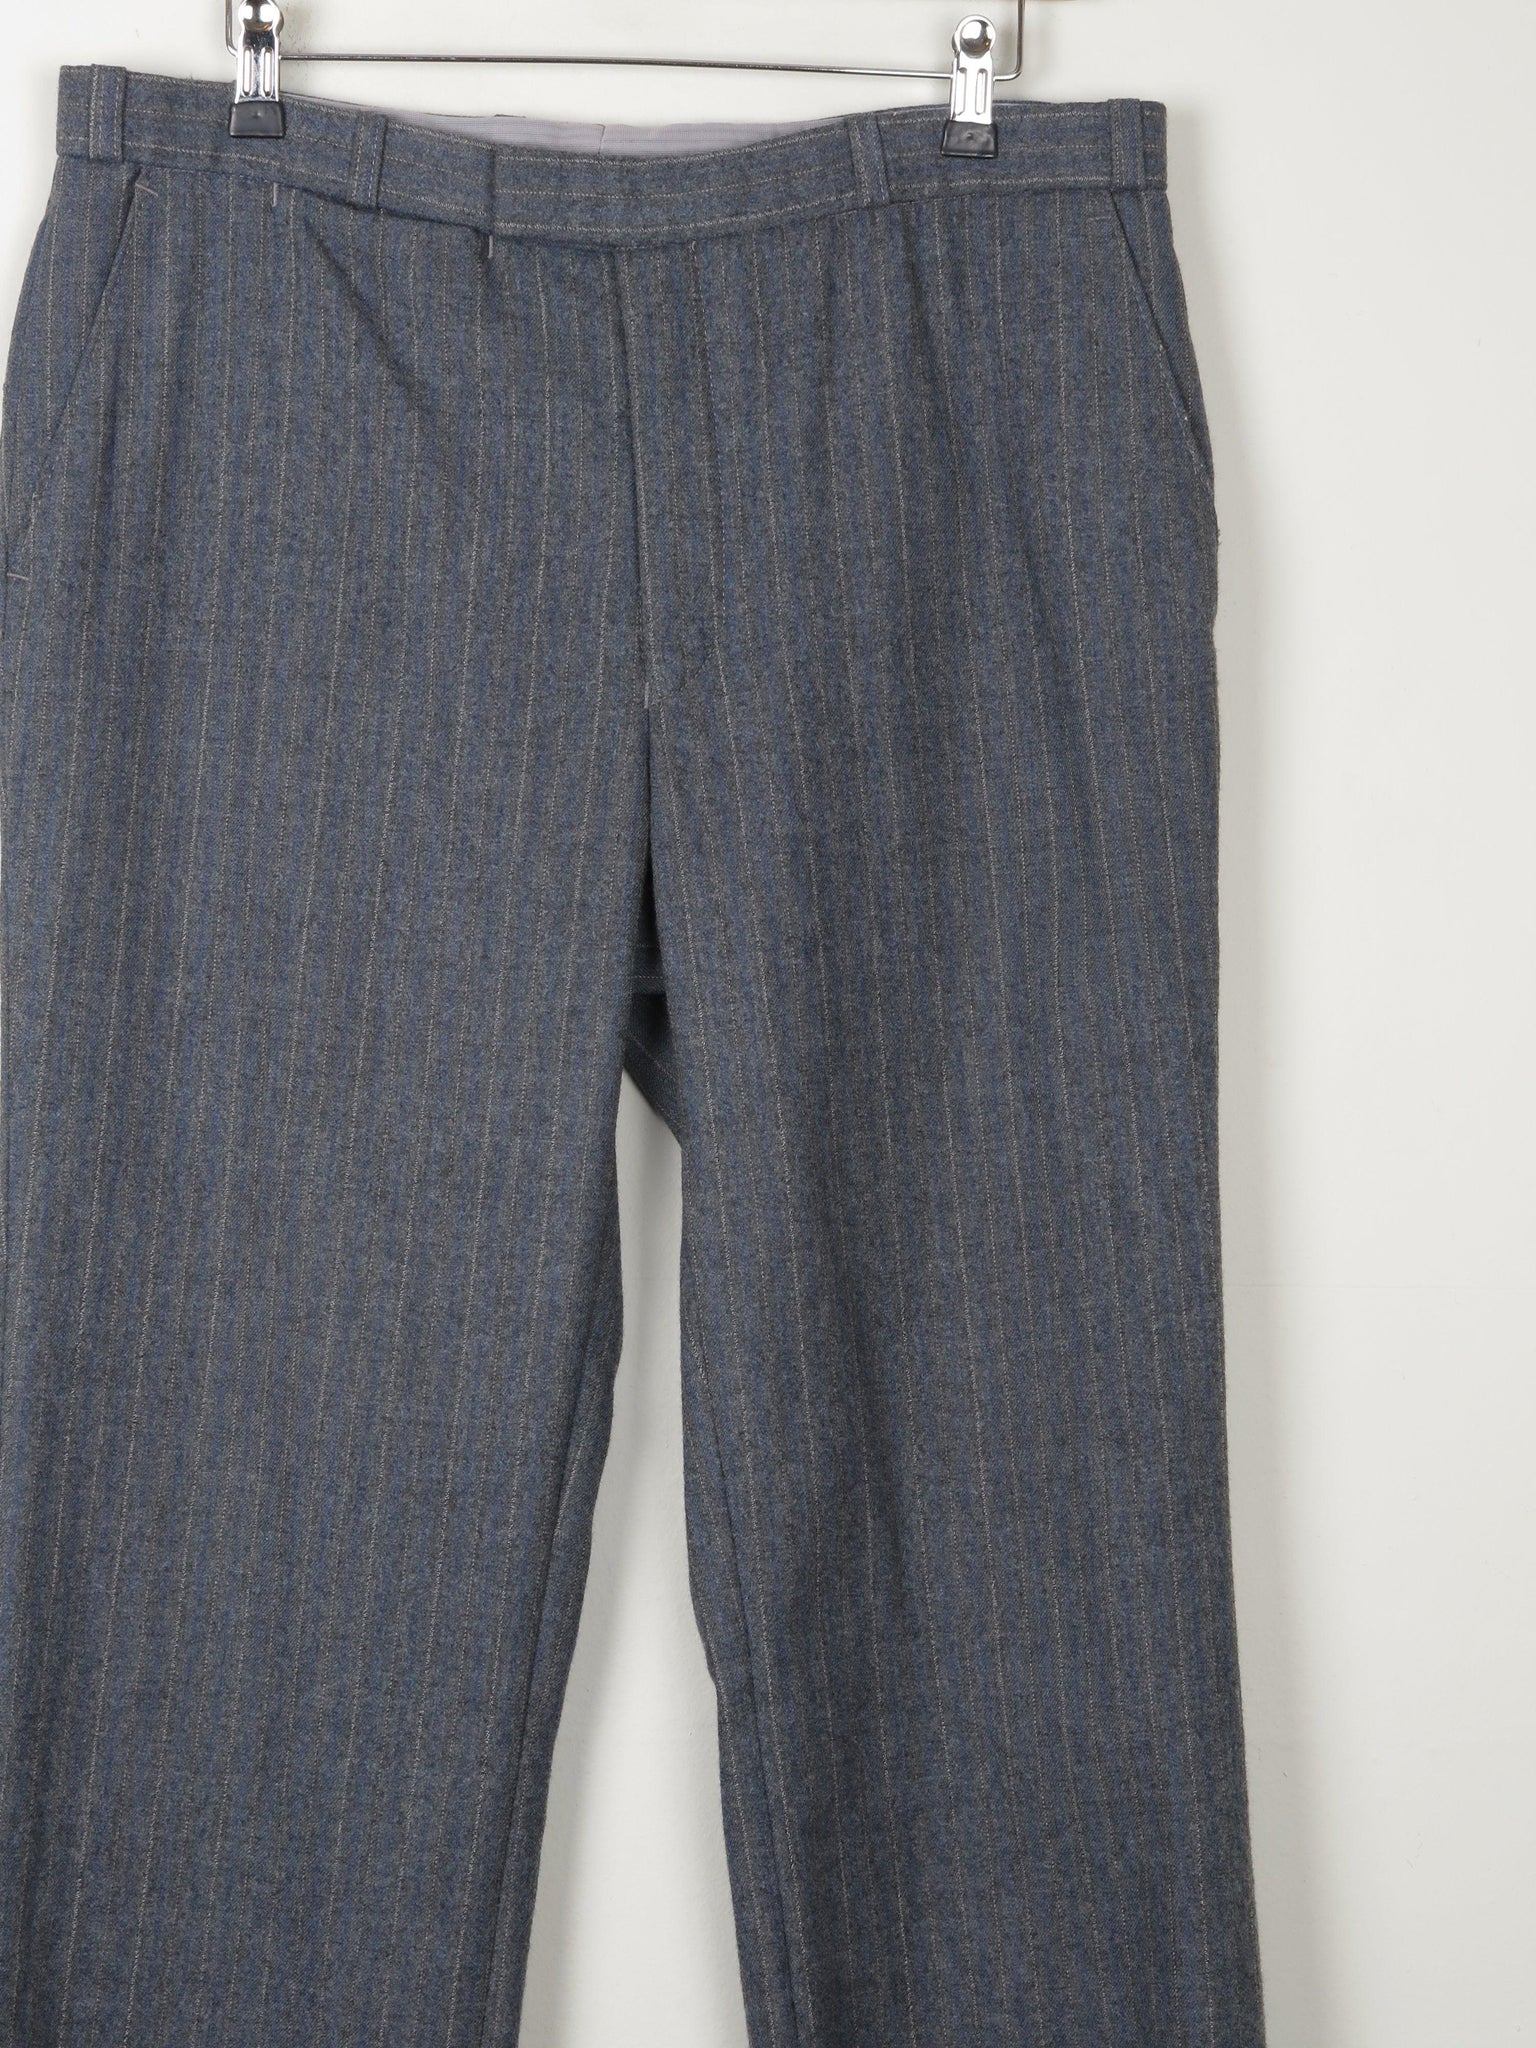 Men's Grey/Blue Striped Wool 1970s Trousers 34"W 32L" - The Harlequin